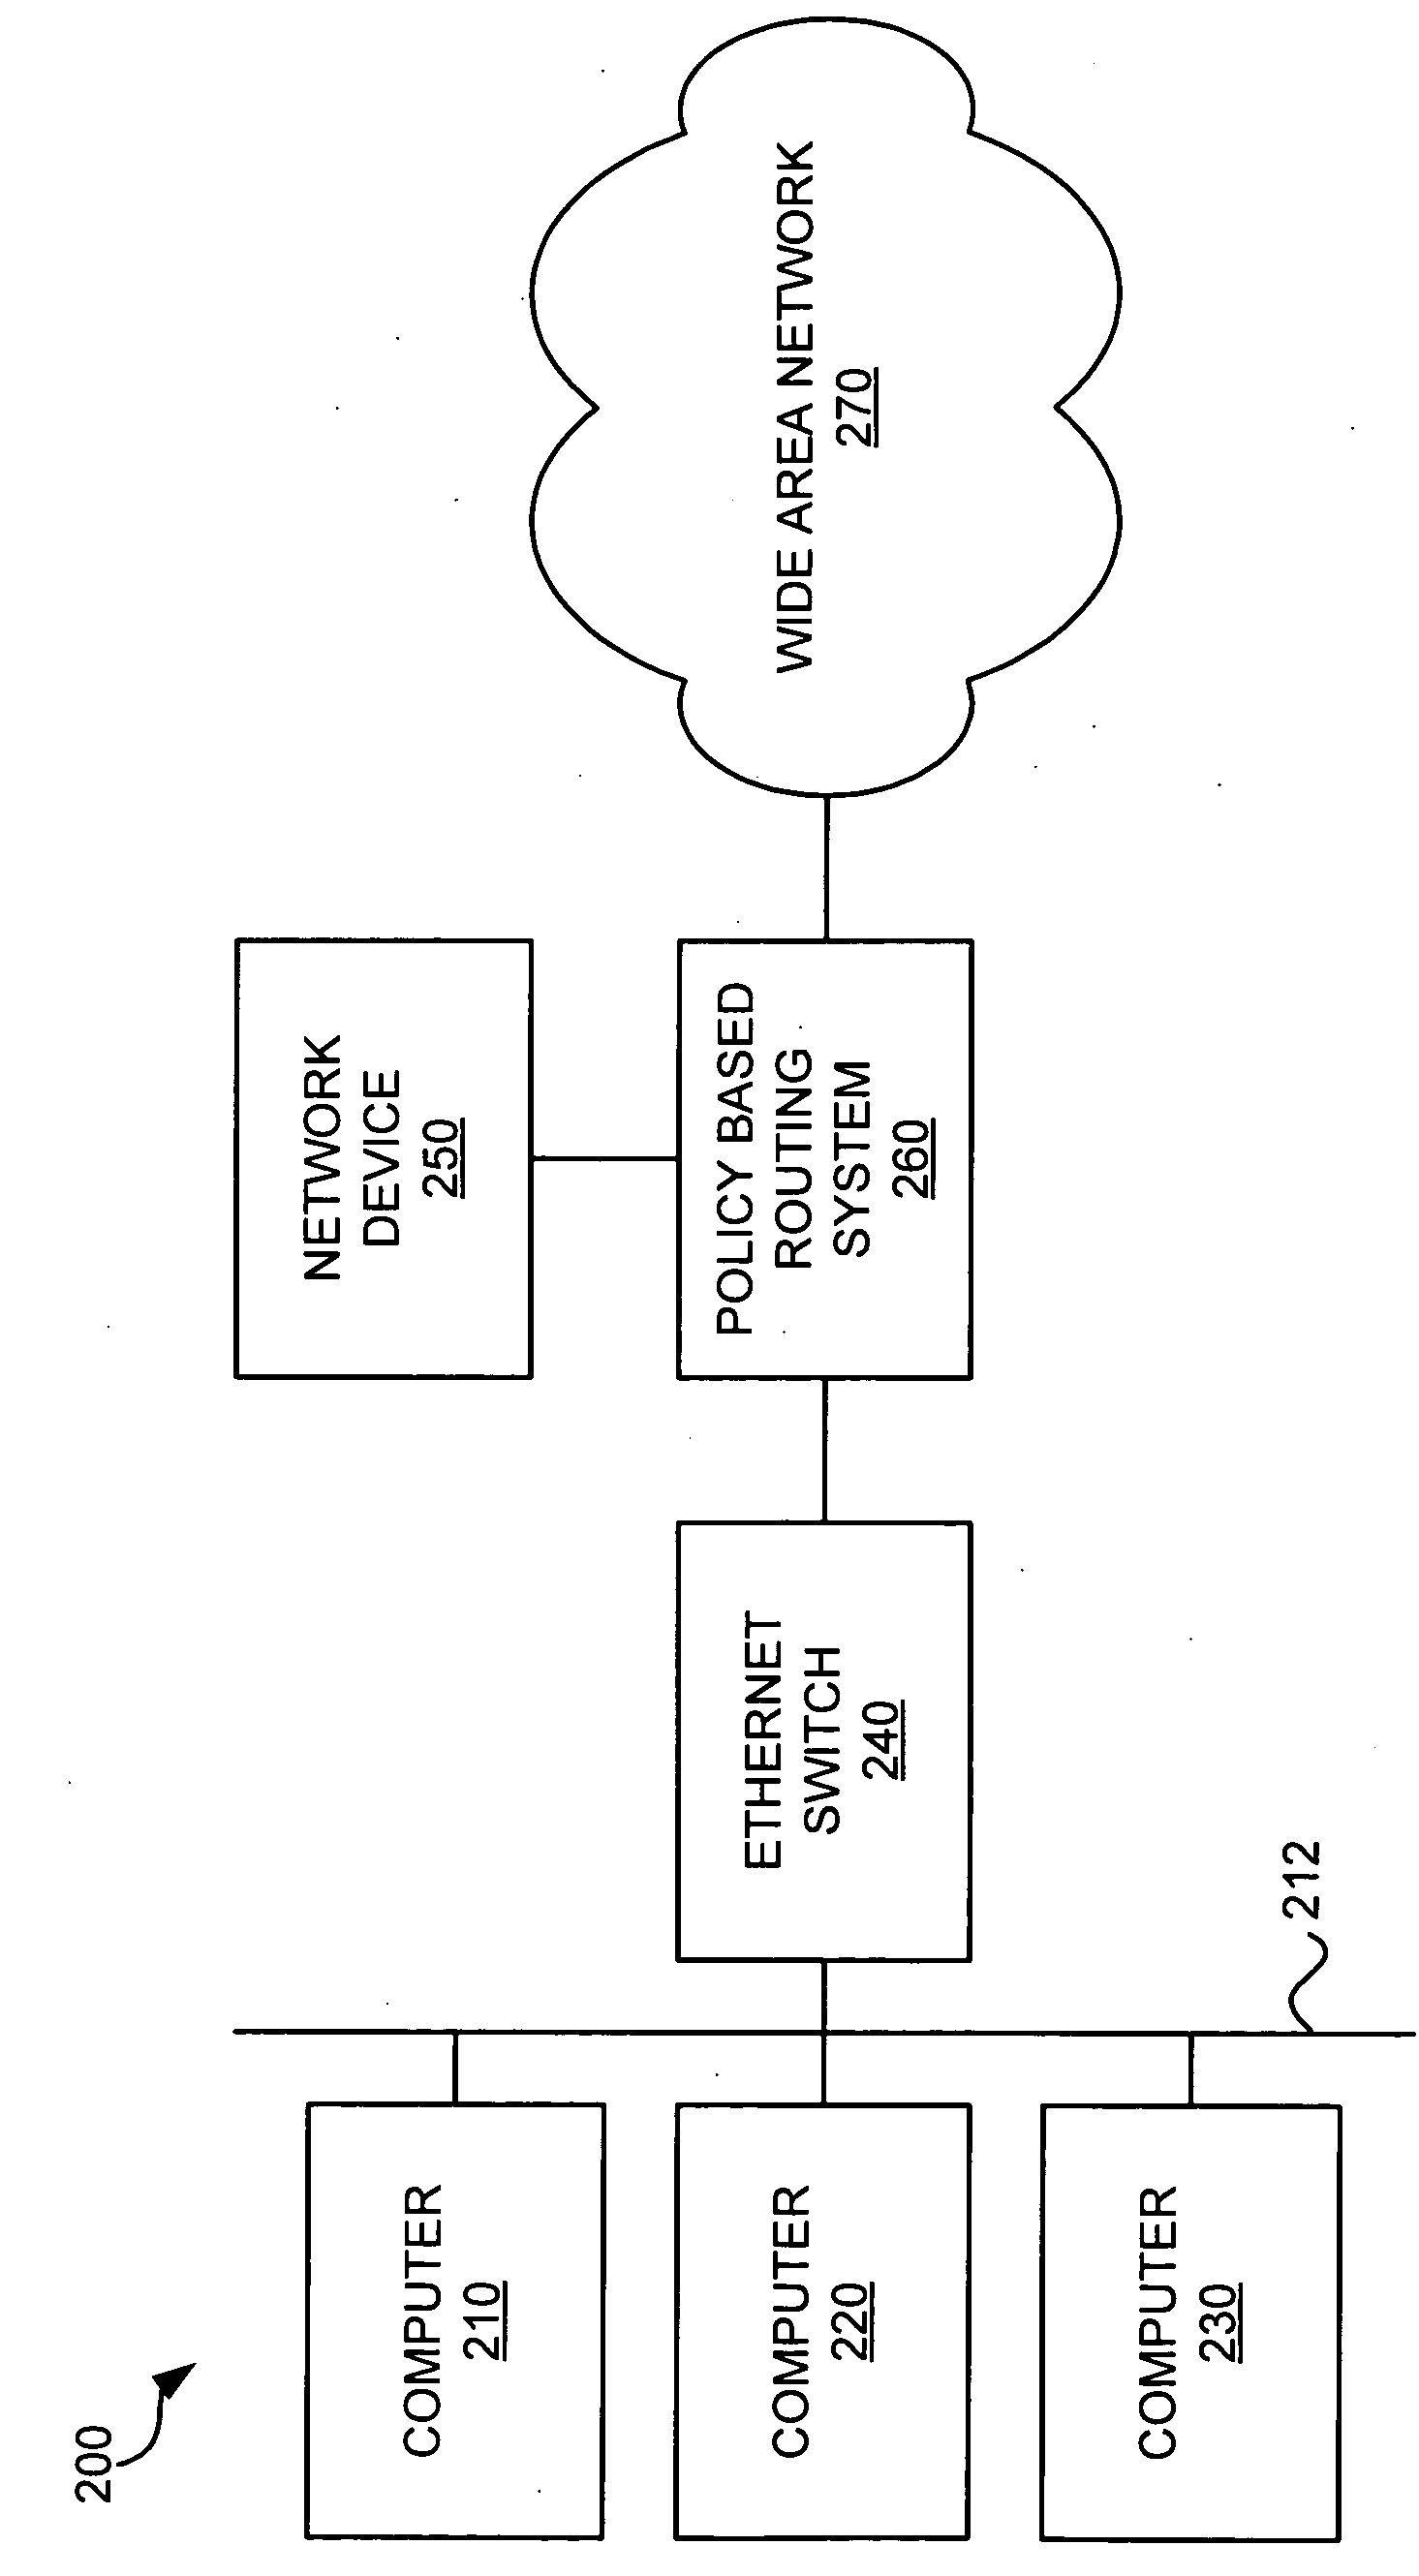 Network device continuity